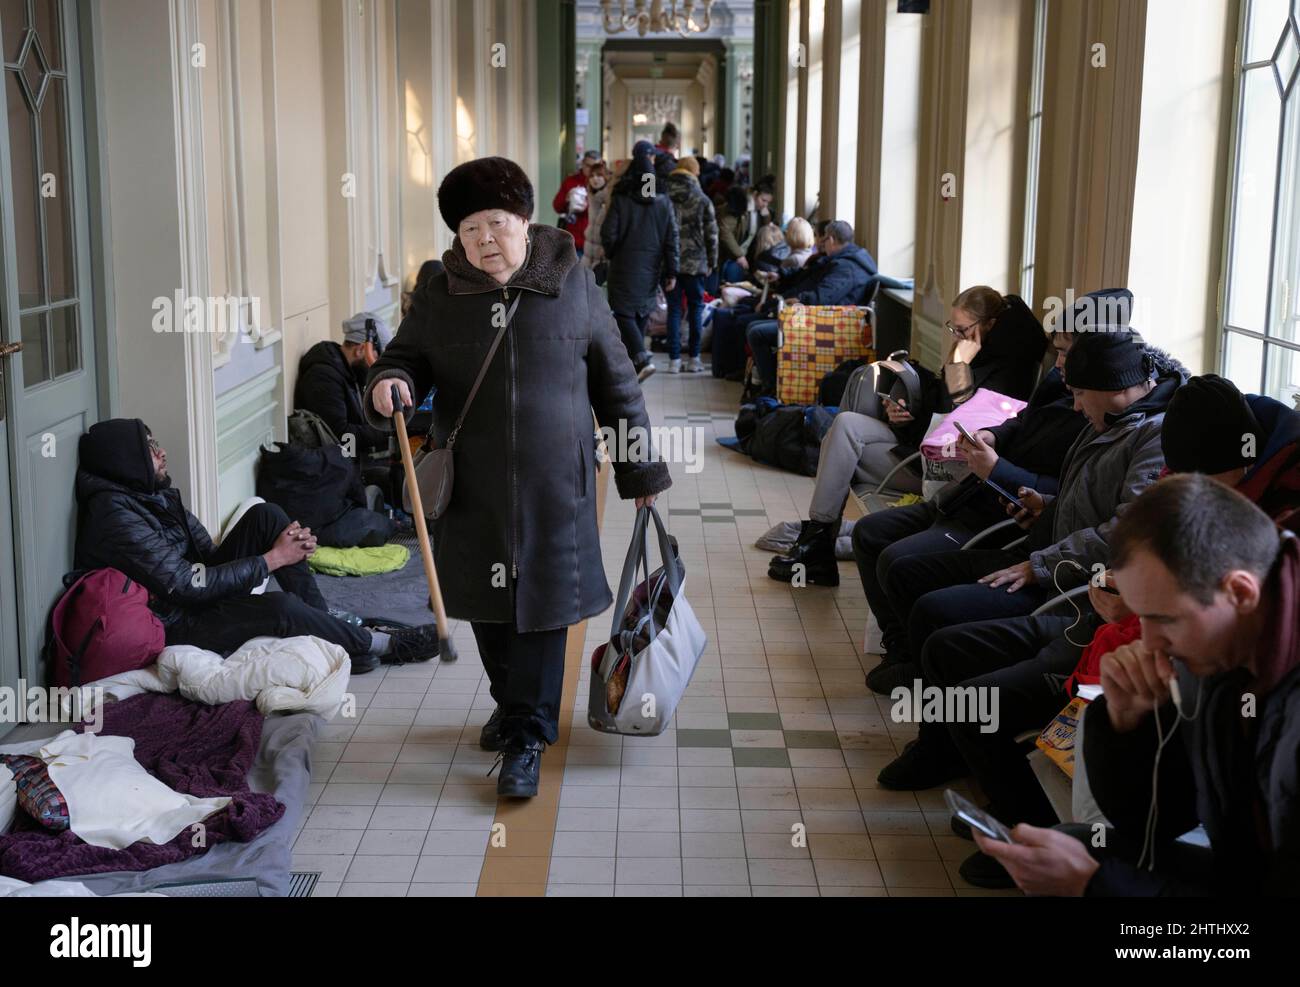 Some of the refugees fleeing the war in Ukraine take the train across the border and reach the Polish city of Przemysl, Feb.28, 2022. The station is overcrowded with refugees waiting for further transport.  Photo Ola Torkelsson / TT / Code 75777 Stock Photo